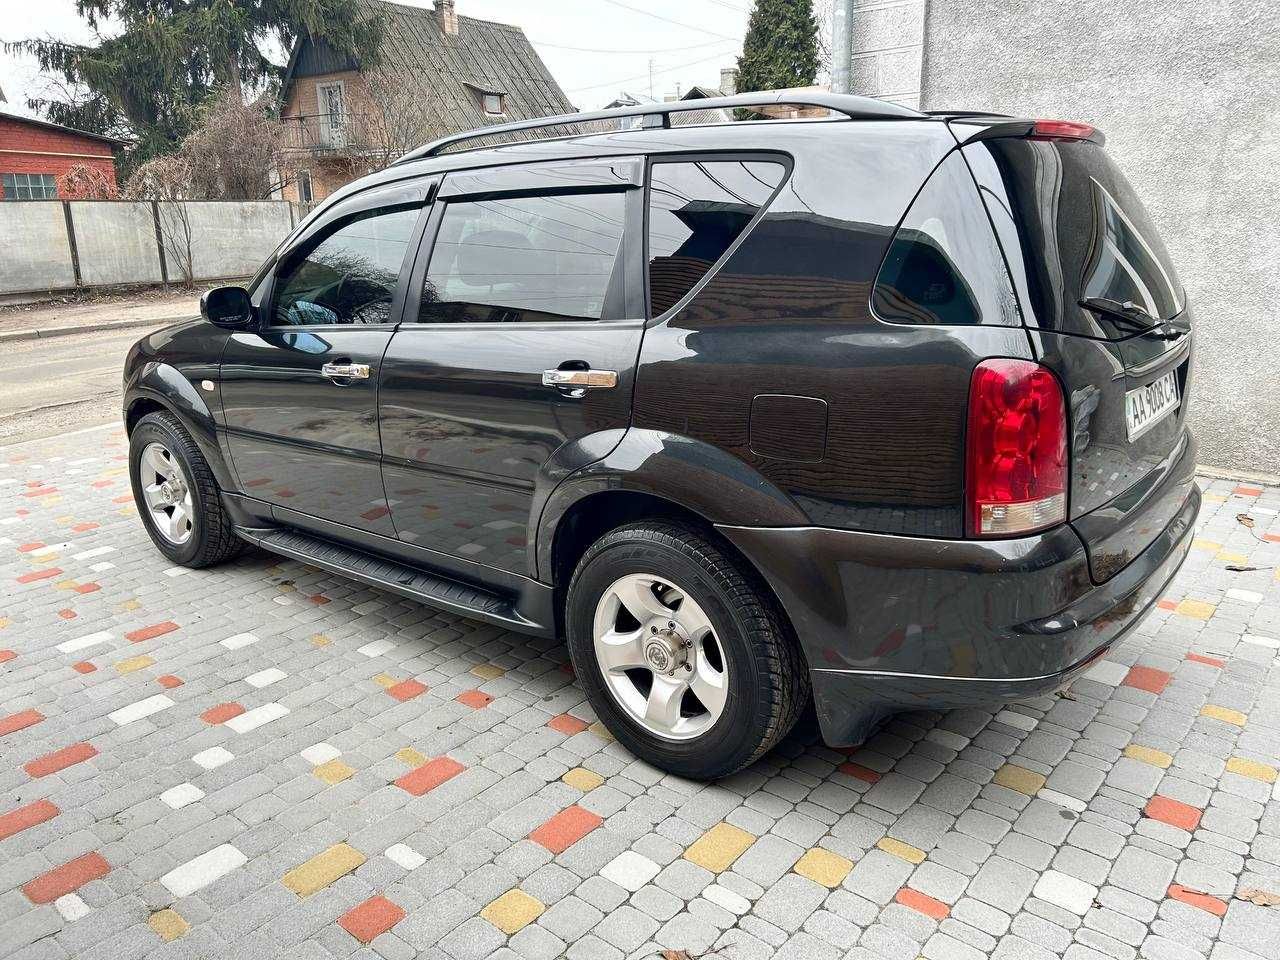 Ssangyong Rexton 2005 (Y200)